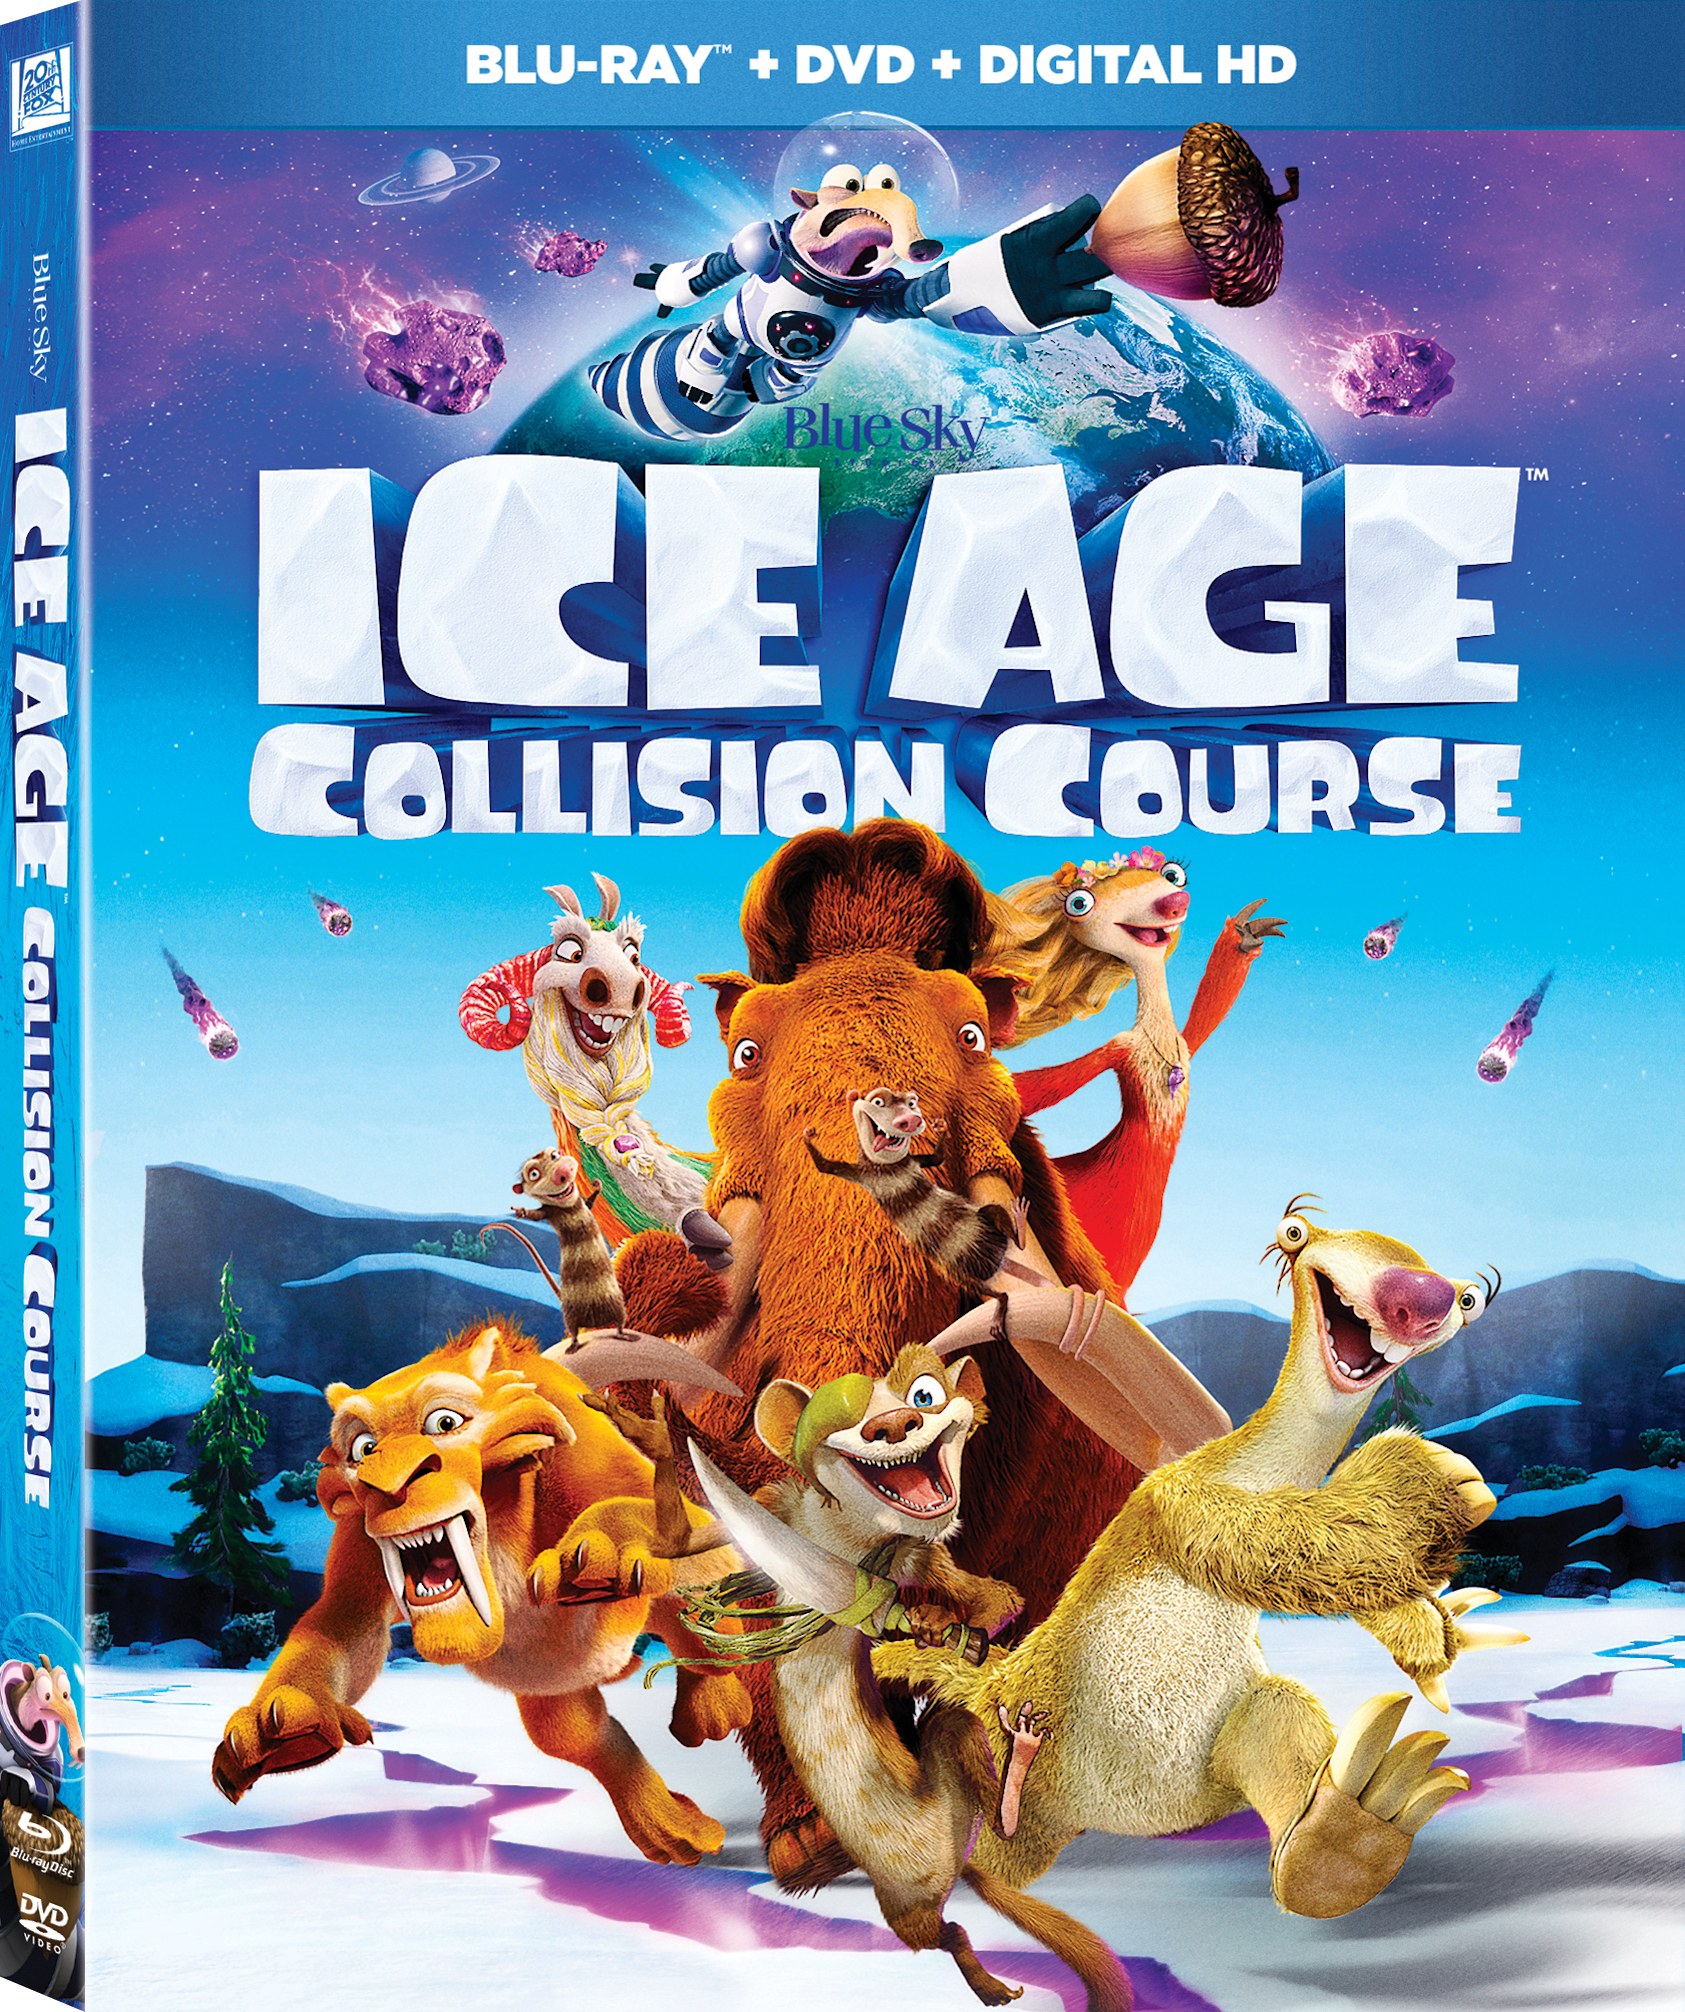 watch ice age full movie online free